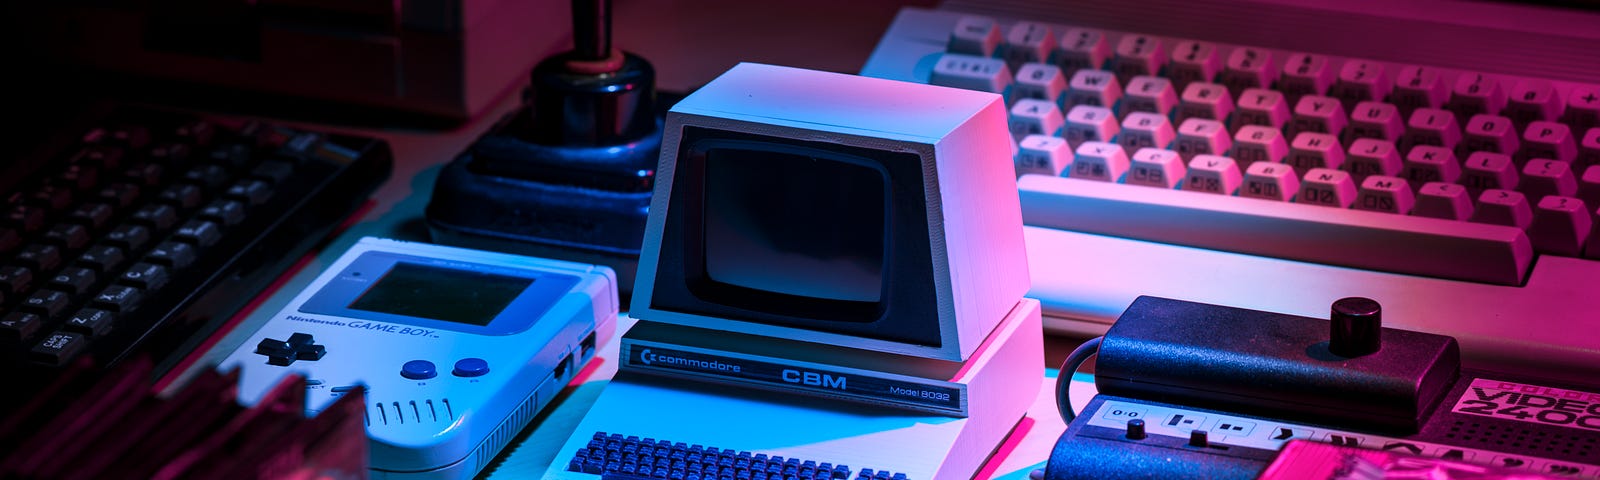 A collection of old computers and gaming console